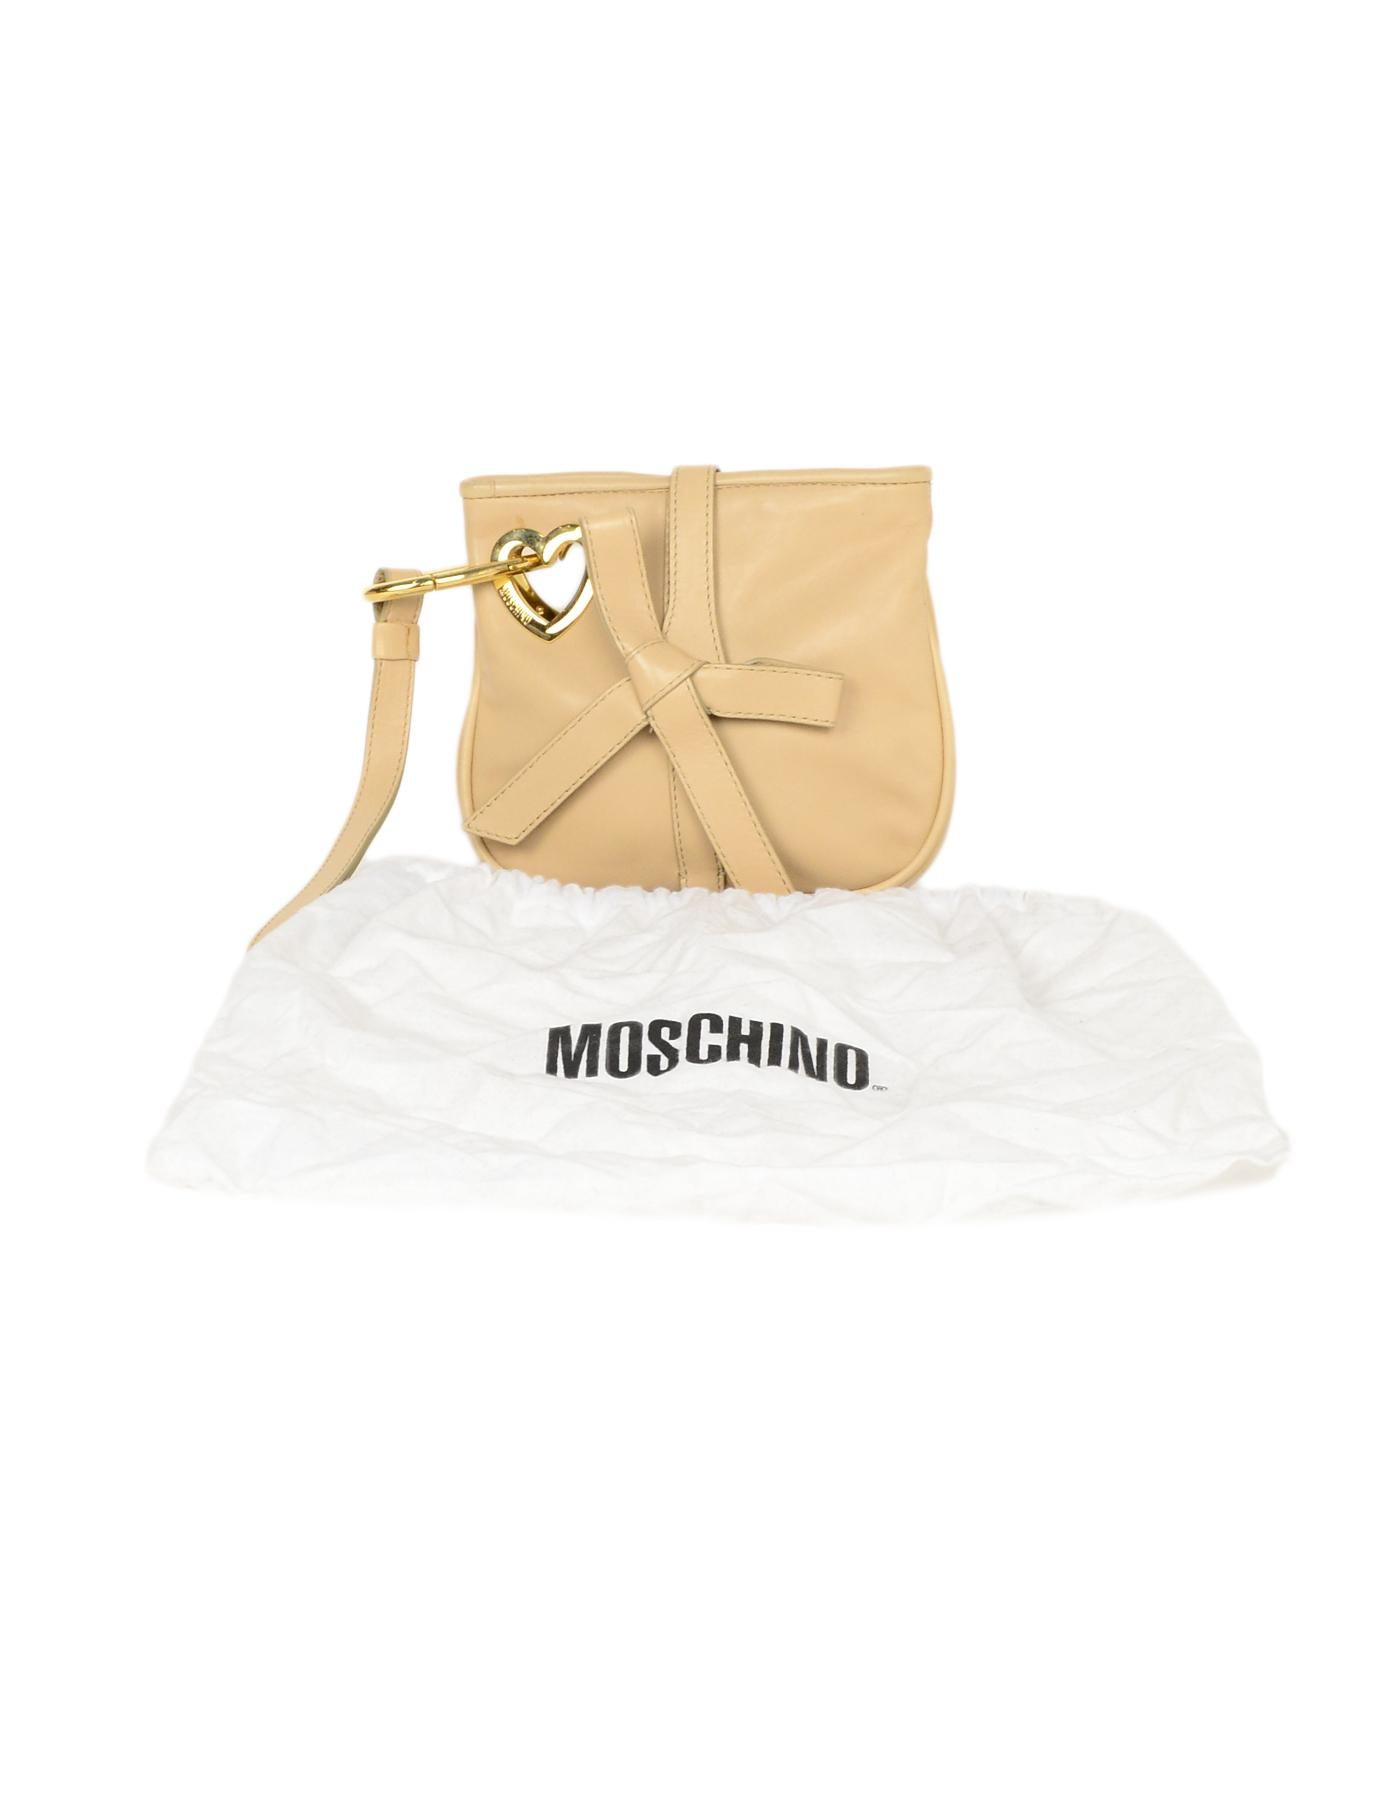 Moschino Nude Leather Bow Wristlet W/ Dust Bag 2